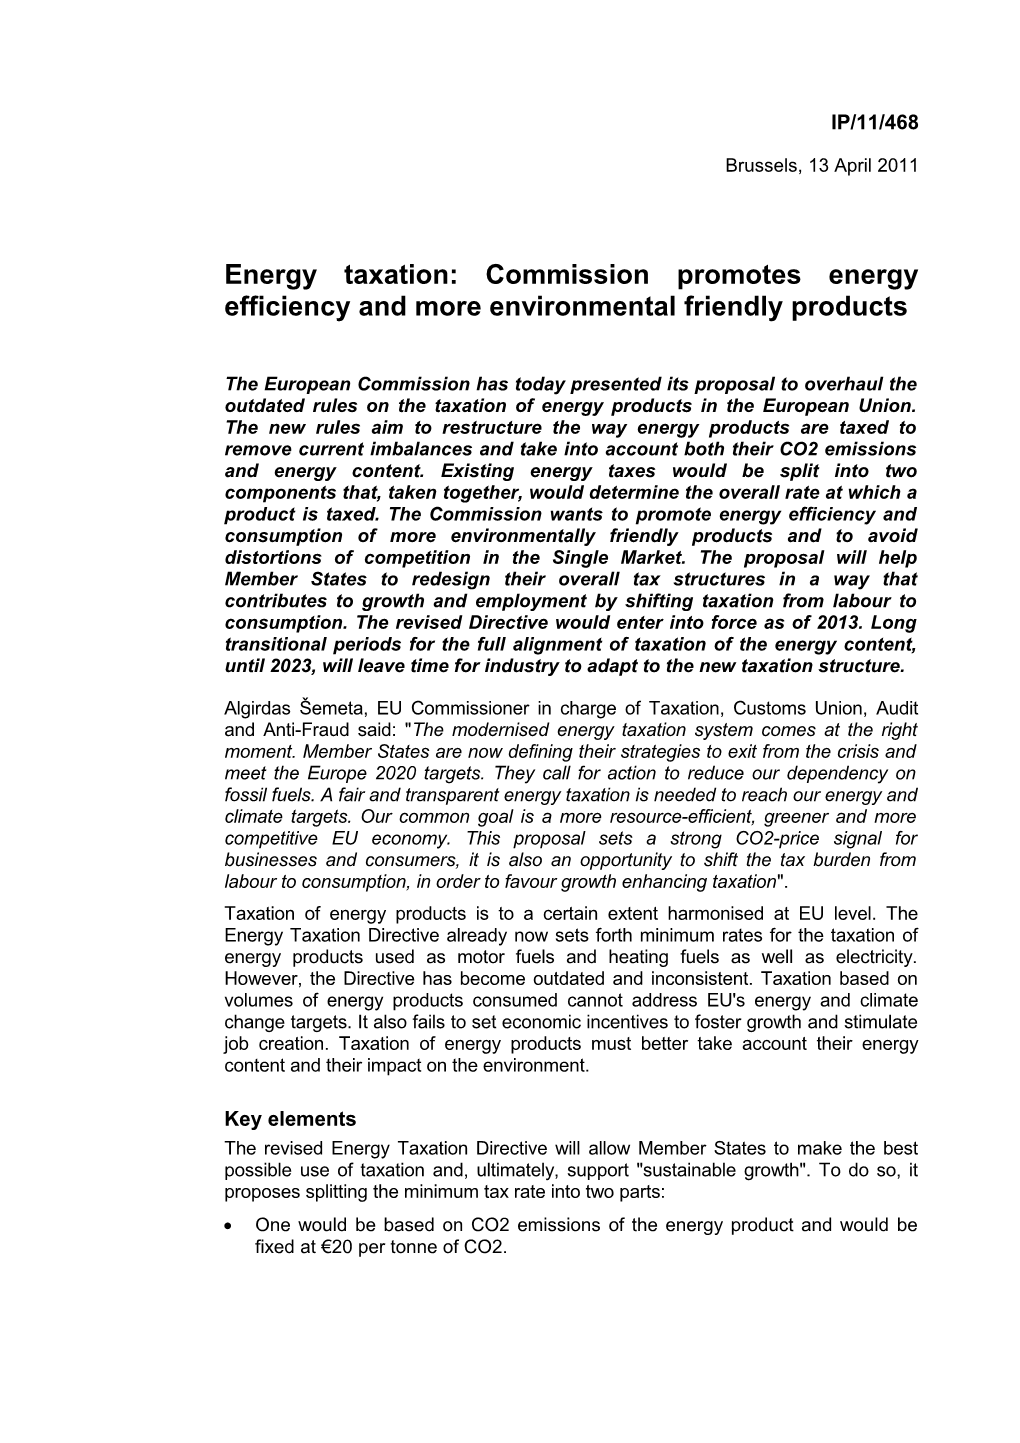 Energy Taxation: Commission Promotes Energy Efficiency and More Environmental Friendly